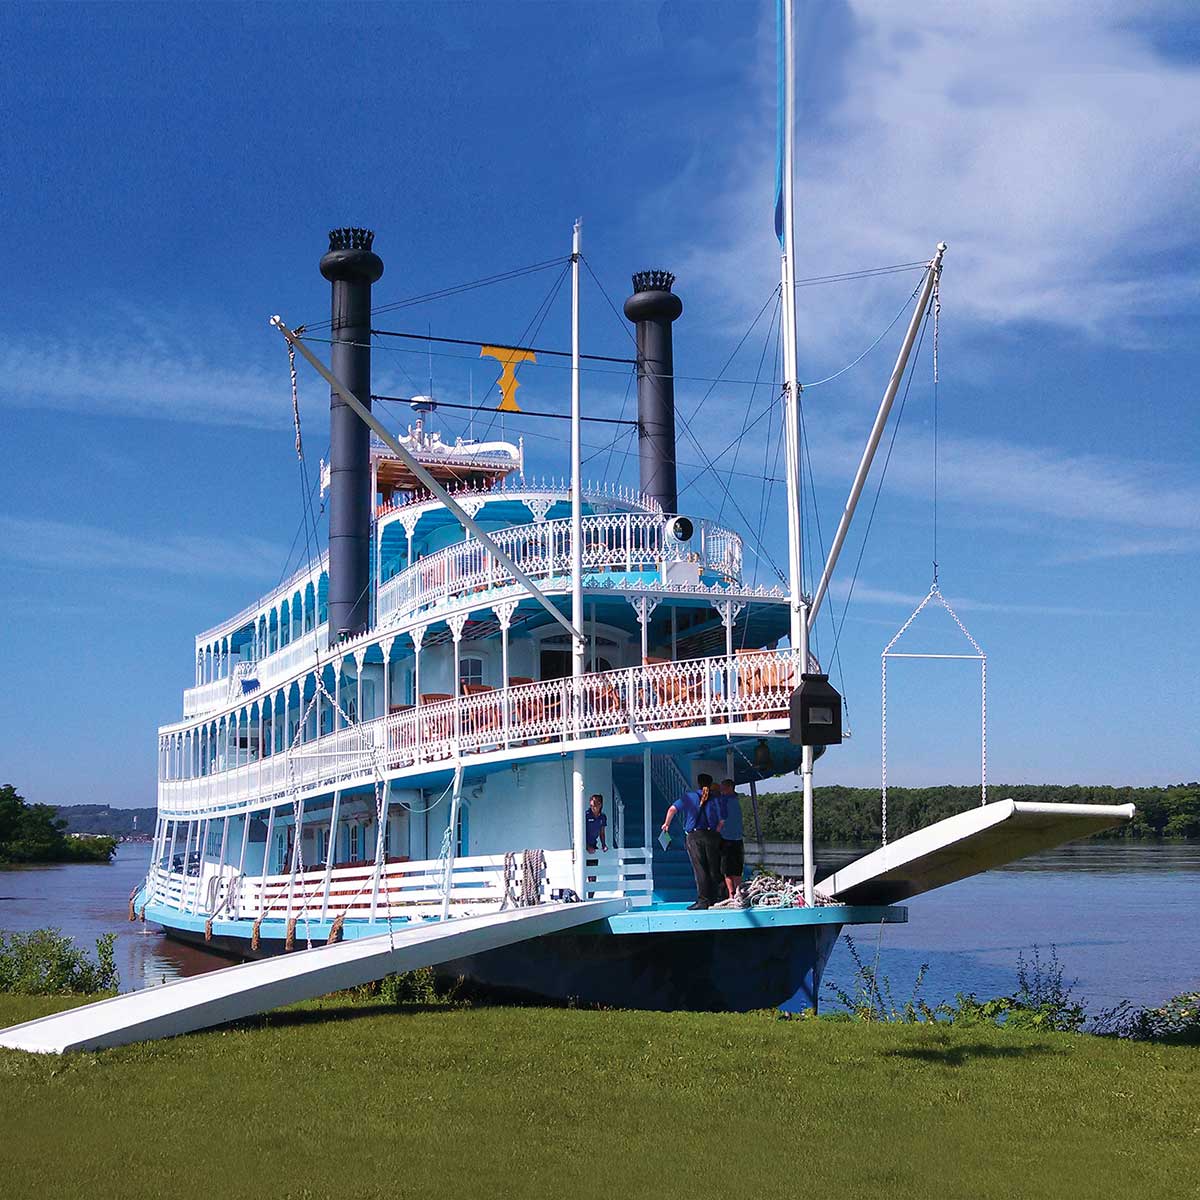 The Riverboat Twilight docked in the Mississippi River